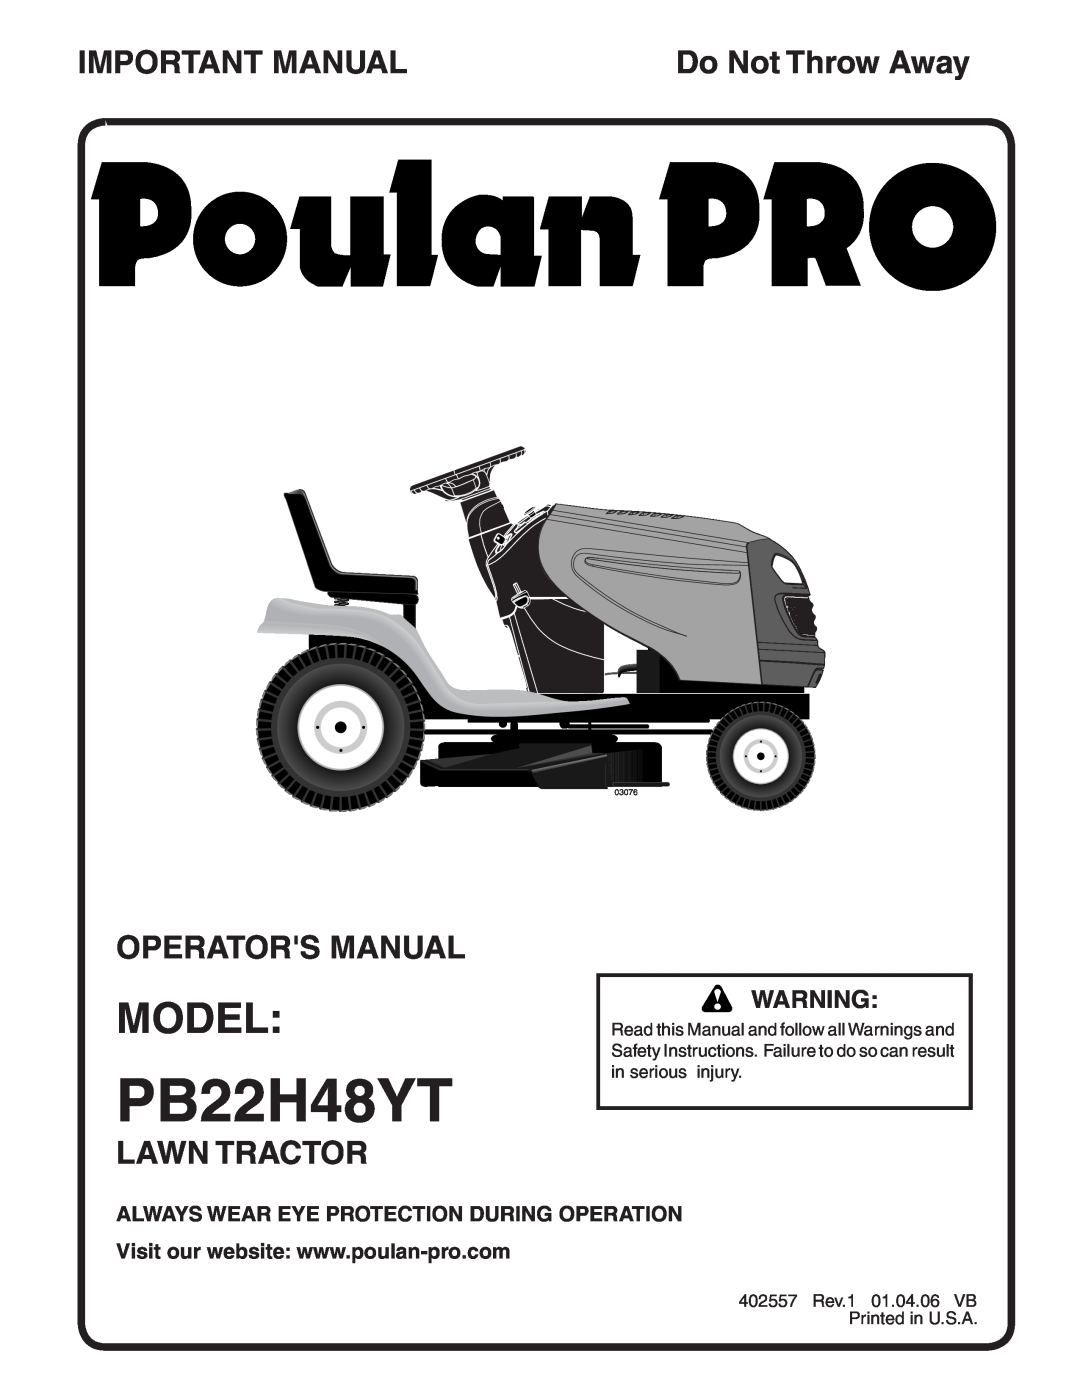 Poulan 402557 manual Model, Important Manual, Operators Manual, Lawn Tractor, Always Wear Eye Protection During Operation 